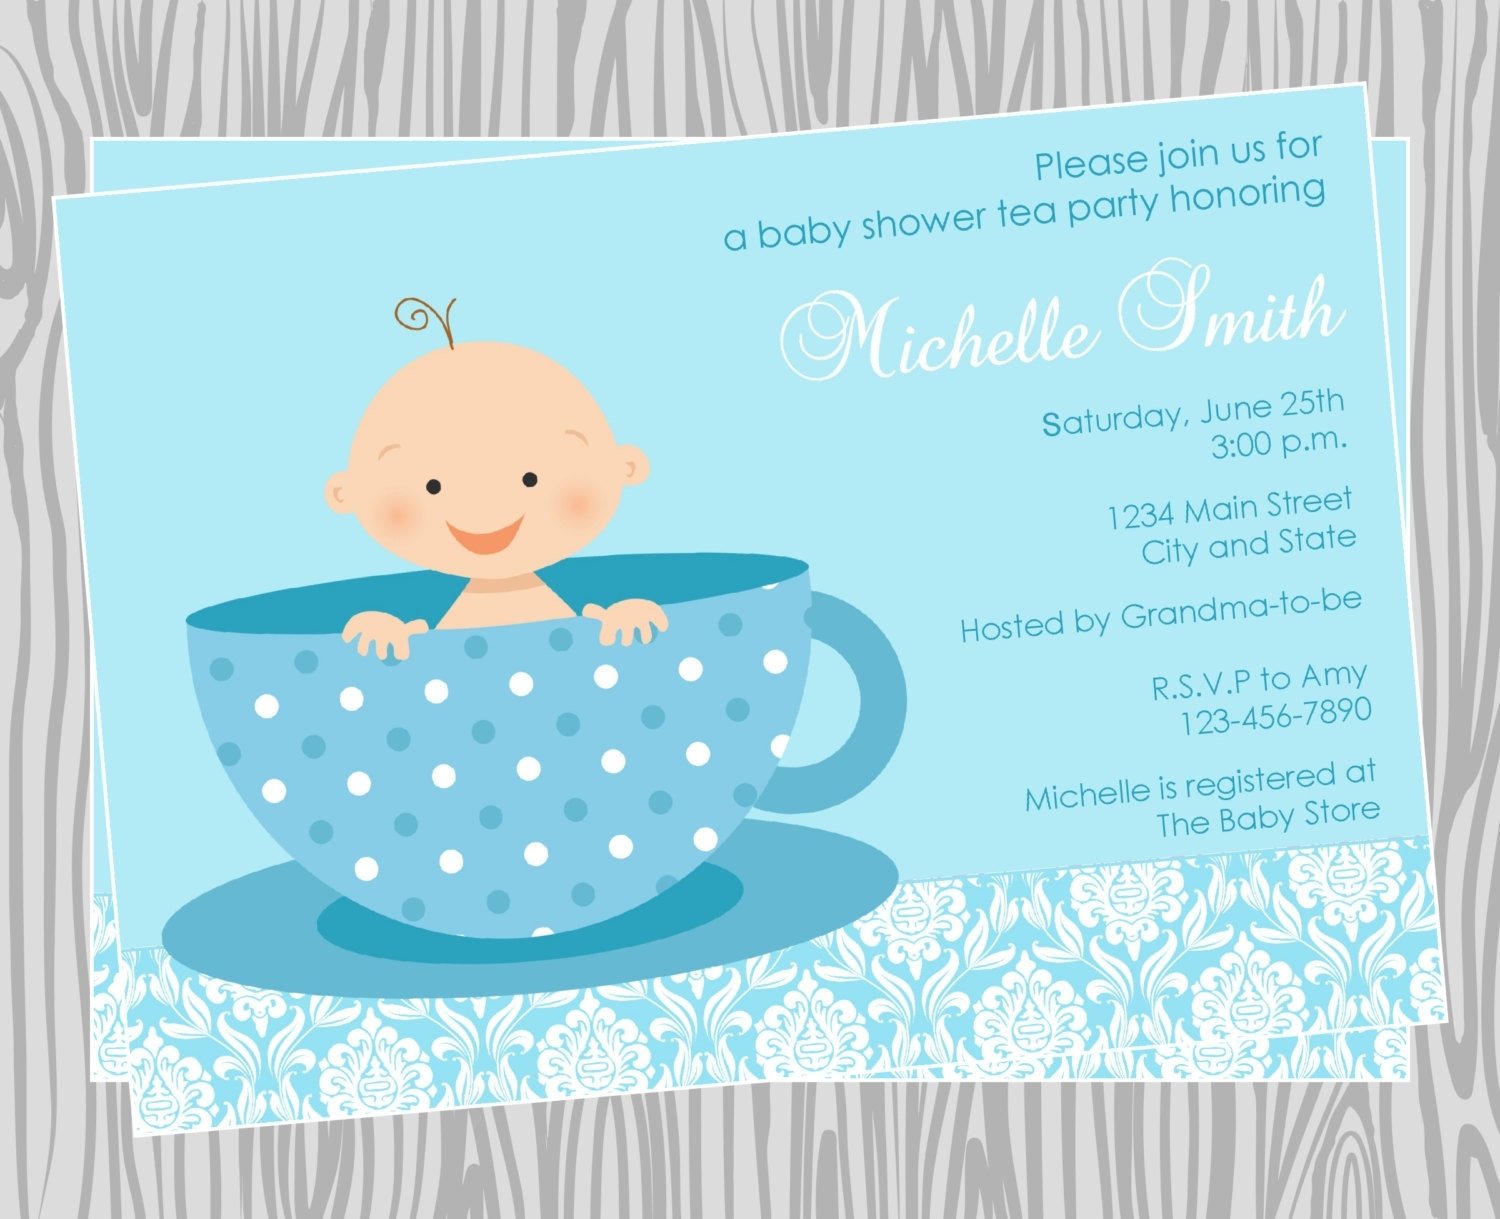 10 Fashionable Ideas For Baby Shower Invitations tea party baby shower invitations e280a2 baby showers design 2022